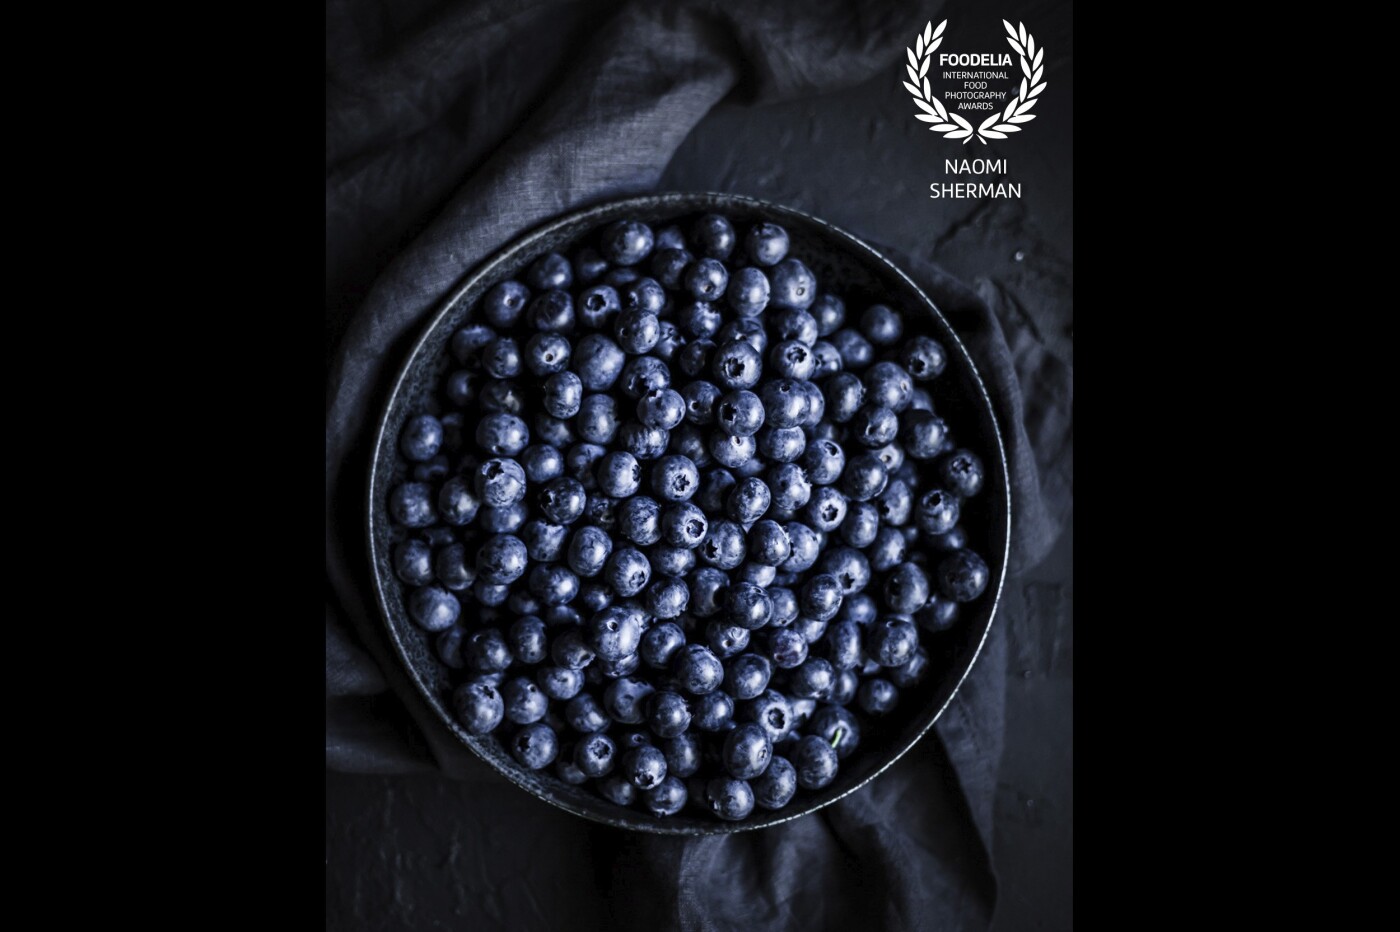 The tone-on-tone look of this image, along with the strong directional light, brings the dusky blue surfaces of the blueberries into the forefront.<br />
Shot in my studio, in natural light.